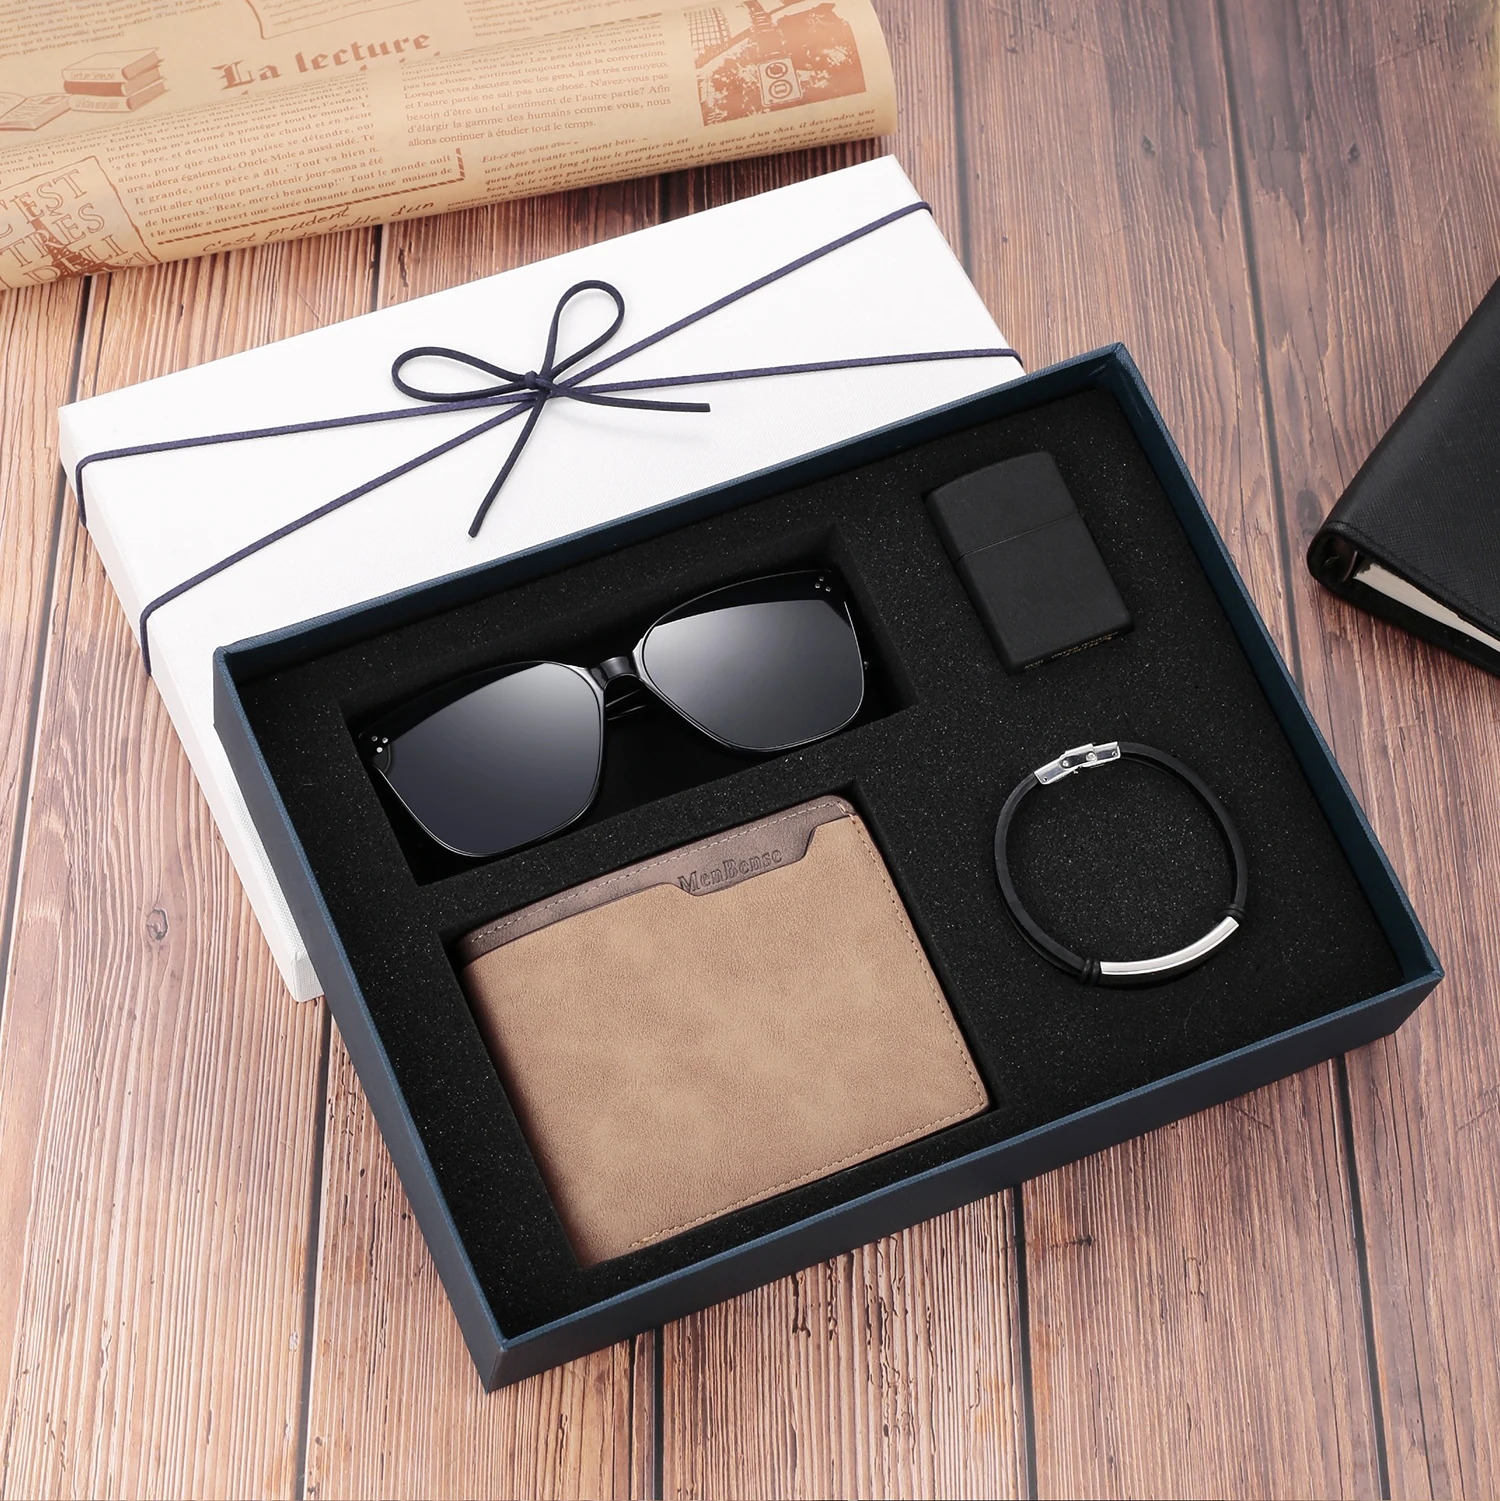 Gift Box Packaging Commemorative Meaning Four-piece Custom Wallet Lighter Men's Bracelets Glasses For The Best Gifts For Friends